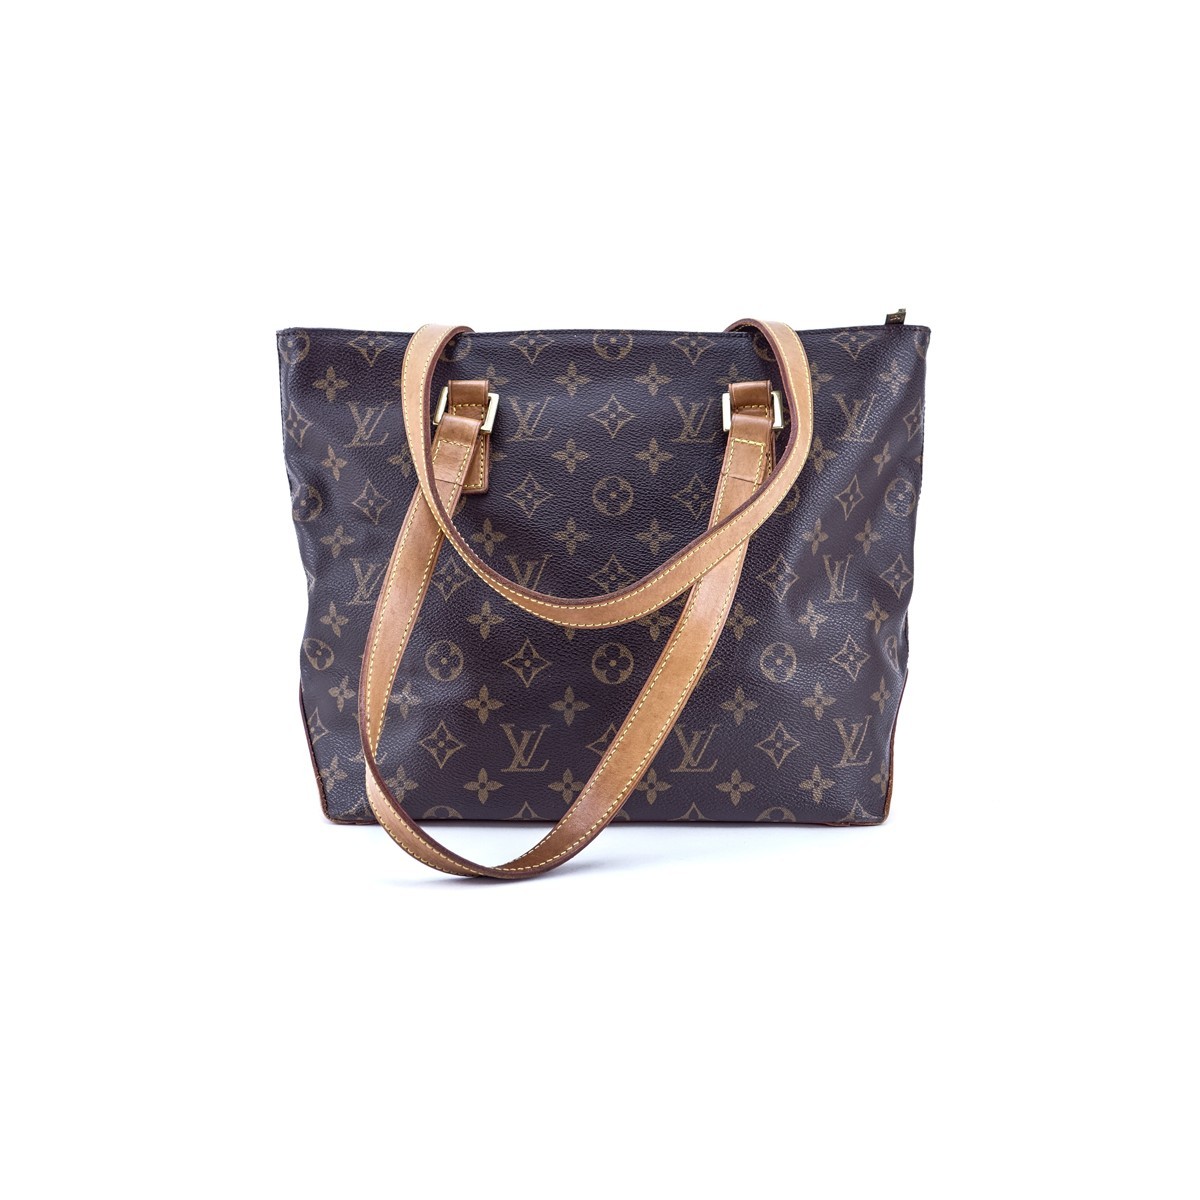 Louis Vuitton Brown Monogram Coated Canvas Cabas Piano Bag. Golden brass hardware, brown interior with zipper and patch pockets, vachetta straps.